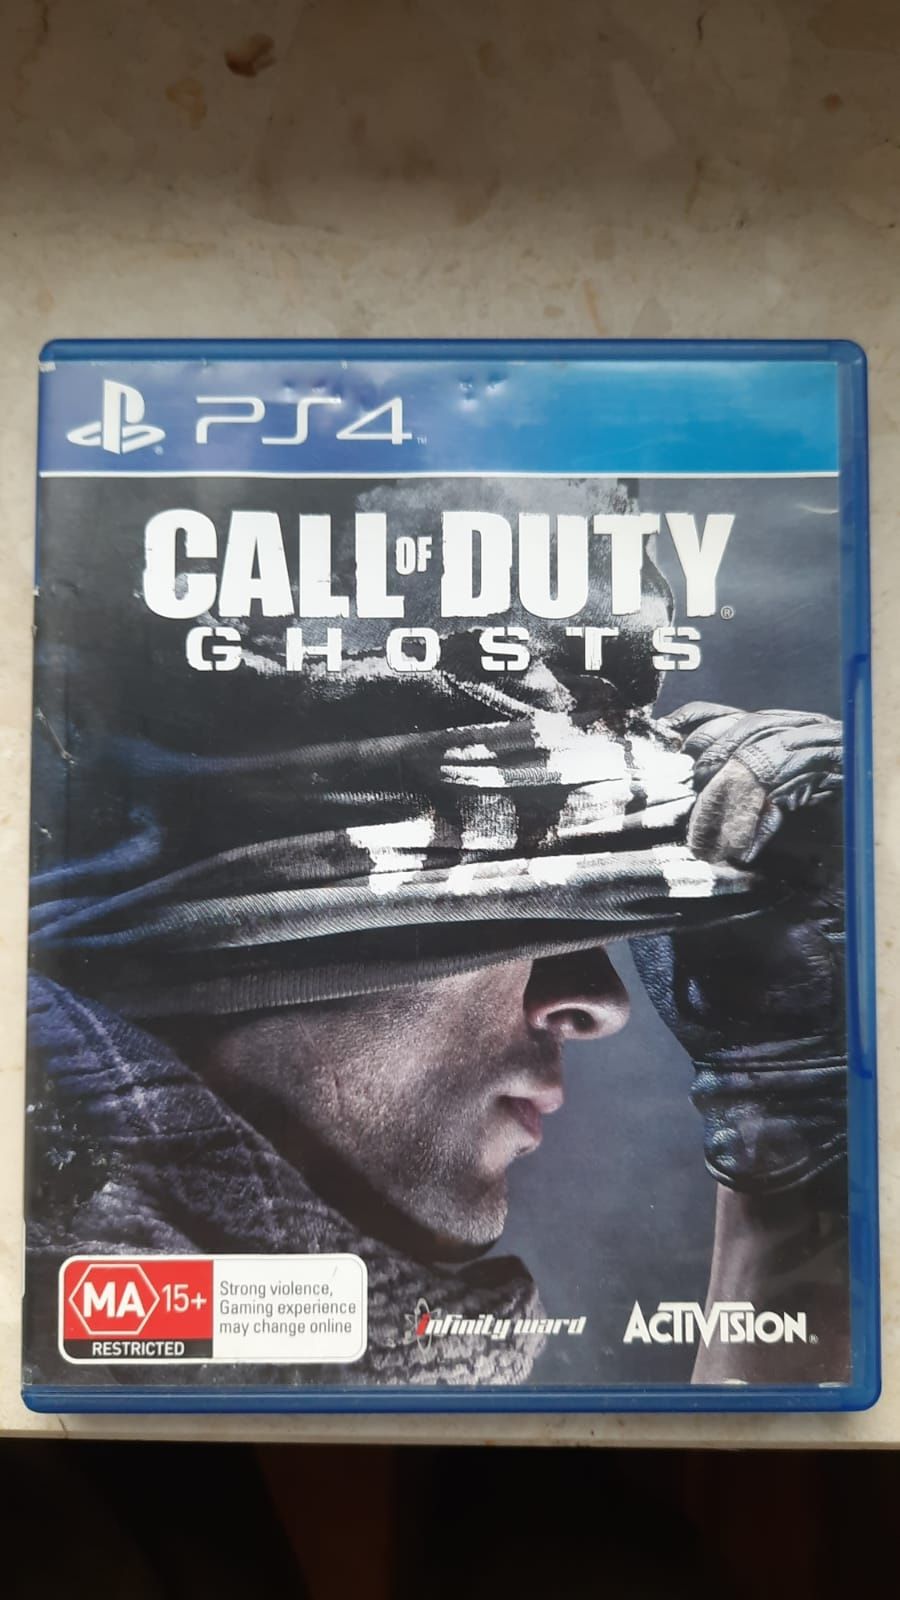 Gra na ps4 Call of Duty Ghosts